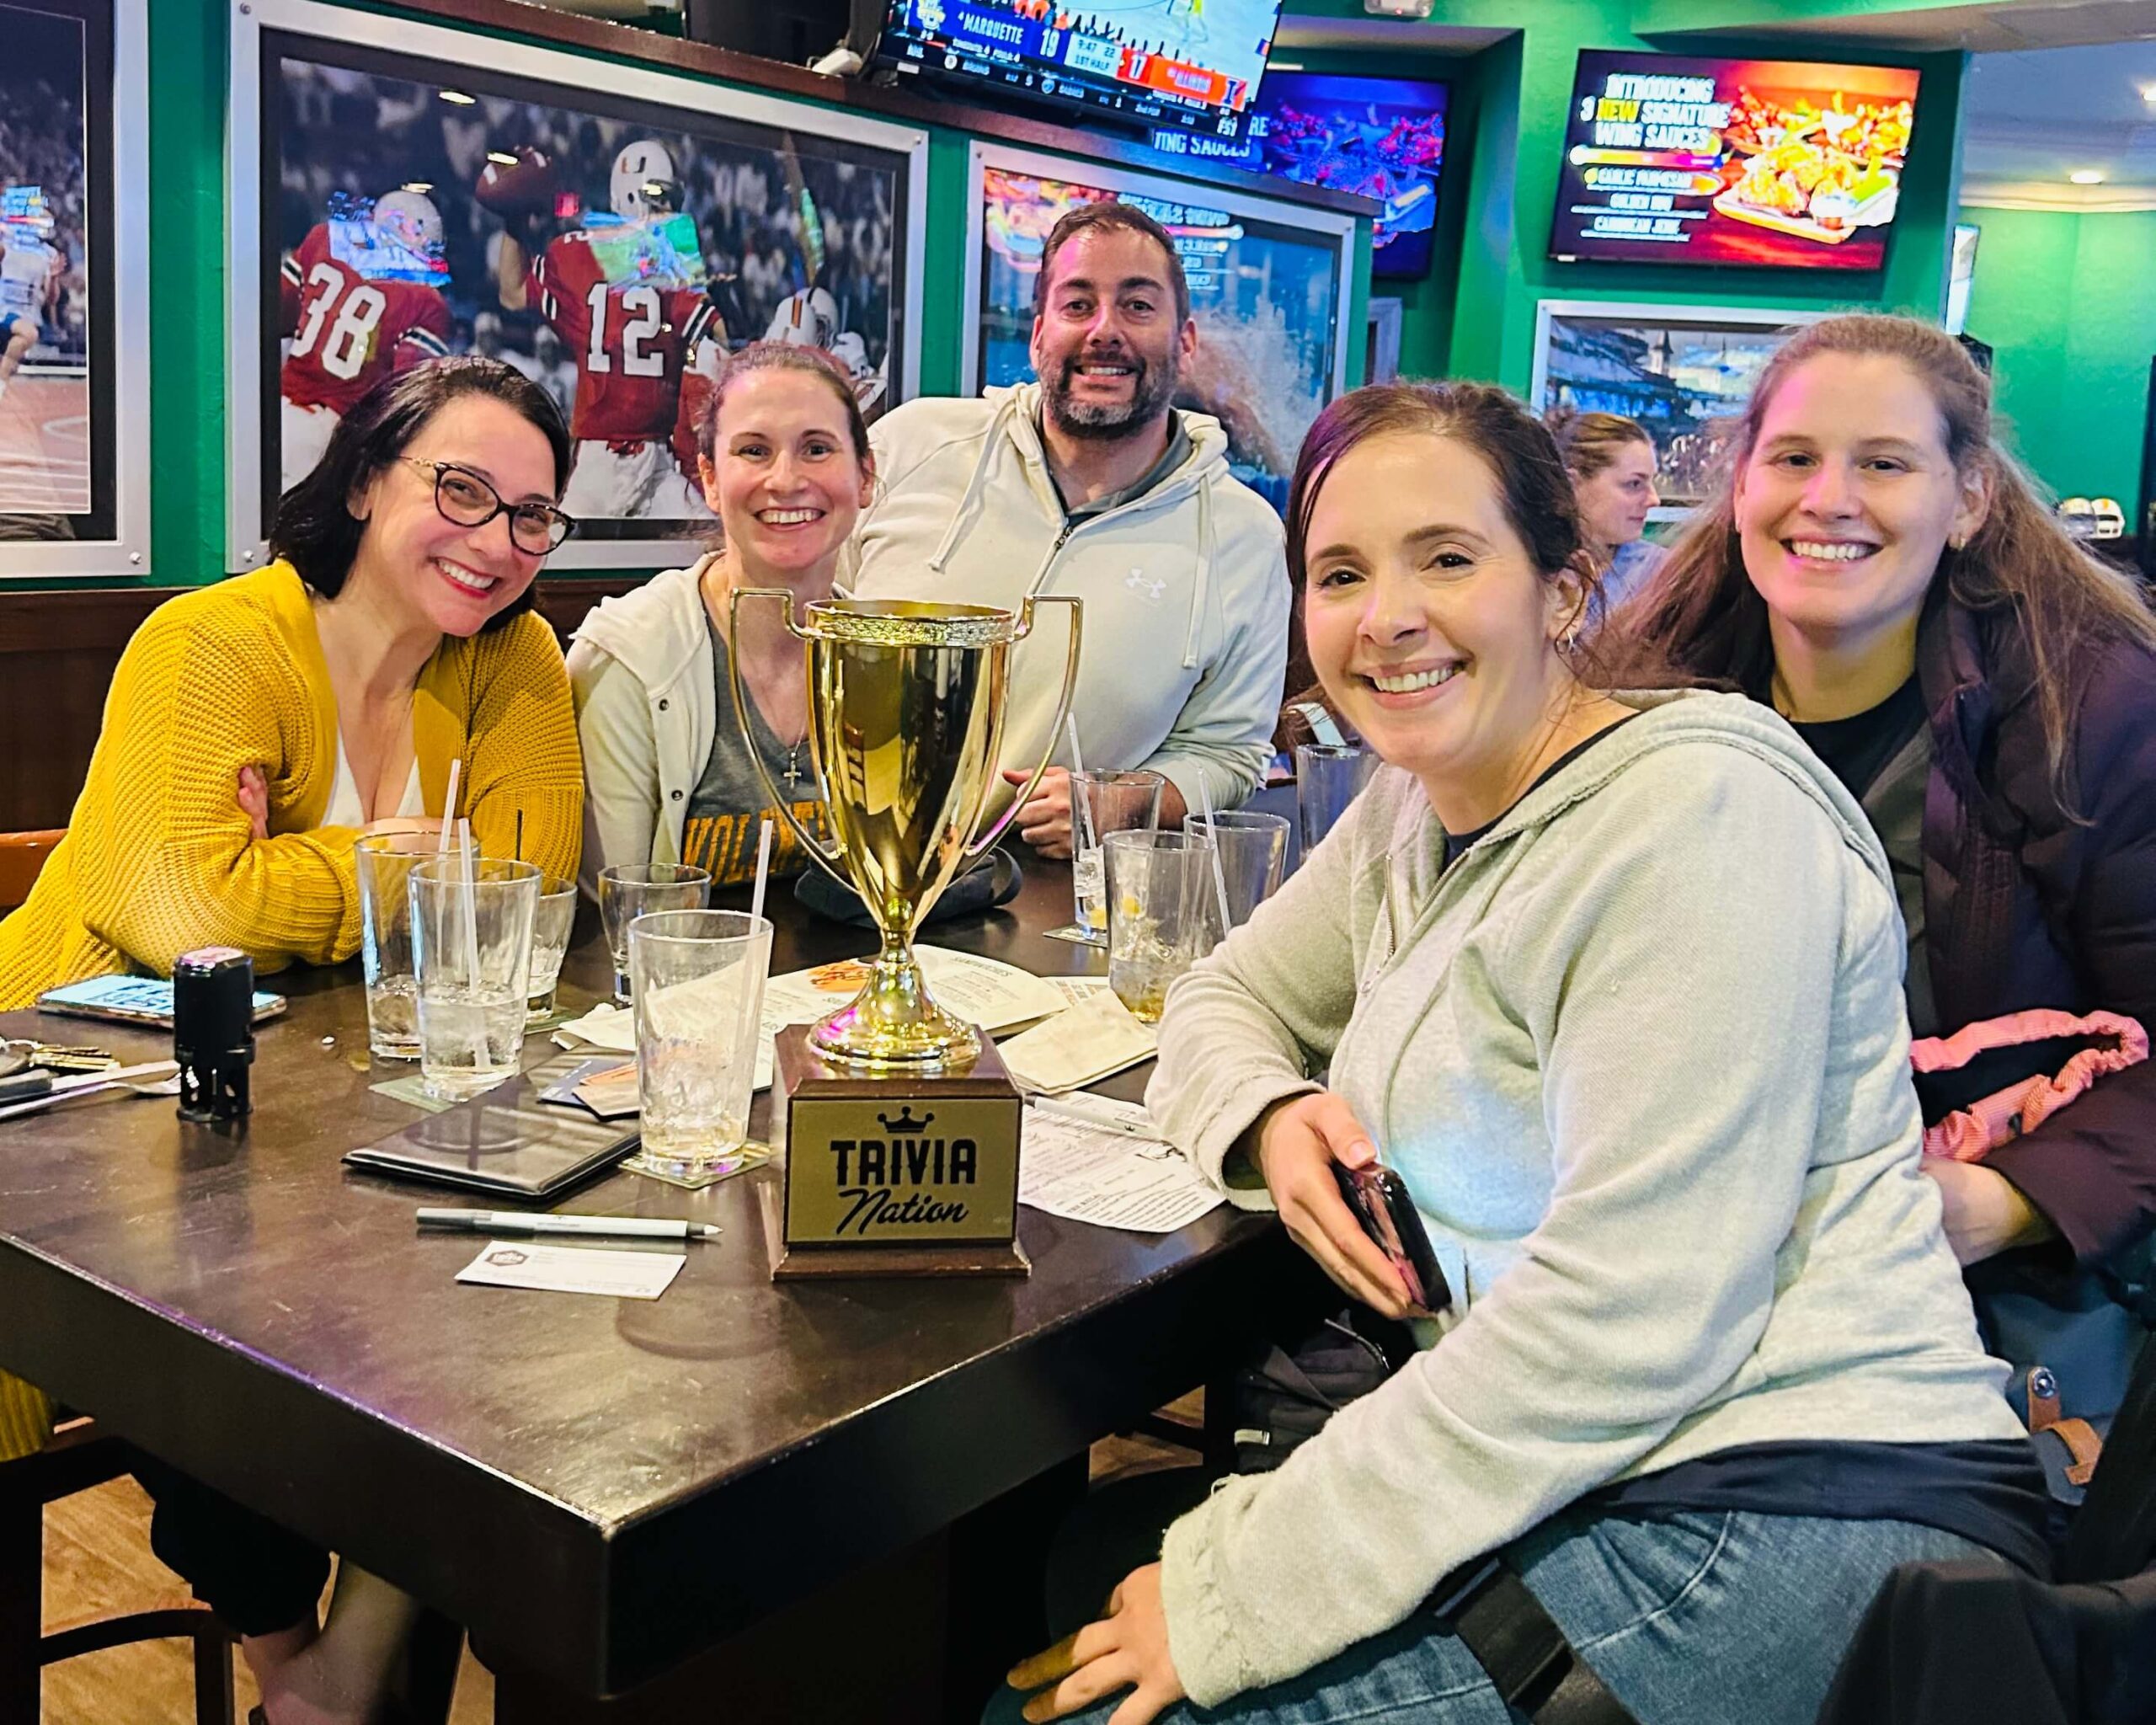 Duffy's Sports Grill Boca Raton FL 33498 trivia night: group of women adults and one man seated together around a table smiling with empty glasses on the table and a Trivia Nation trophy in between them